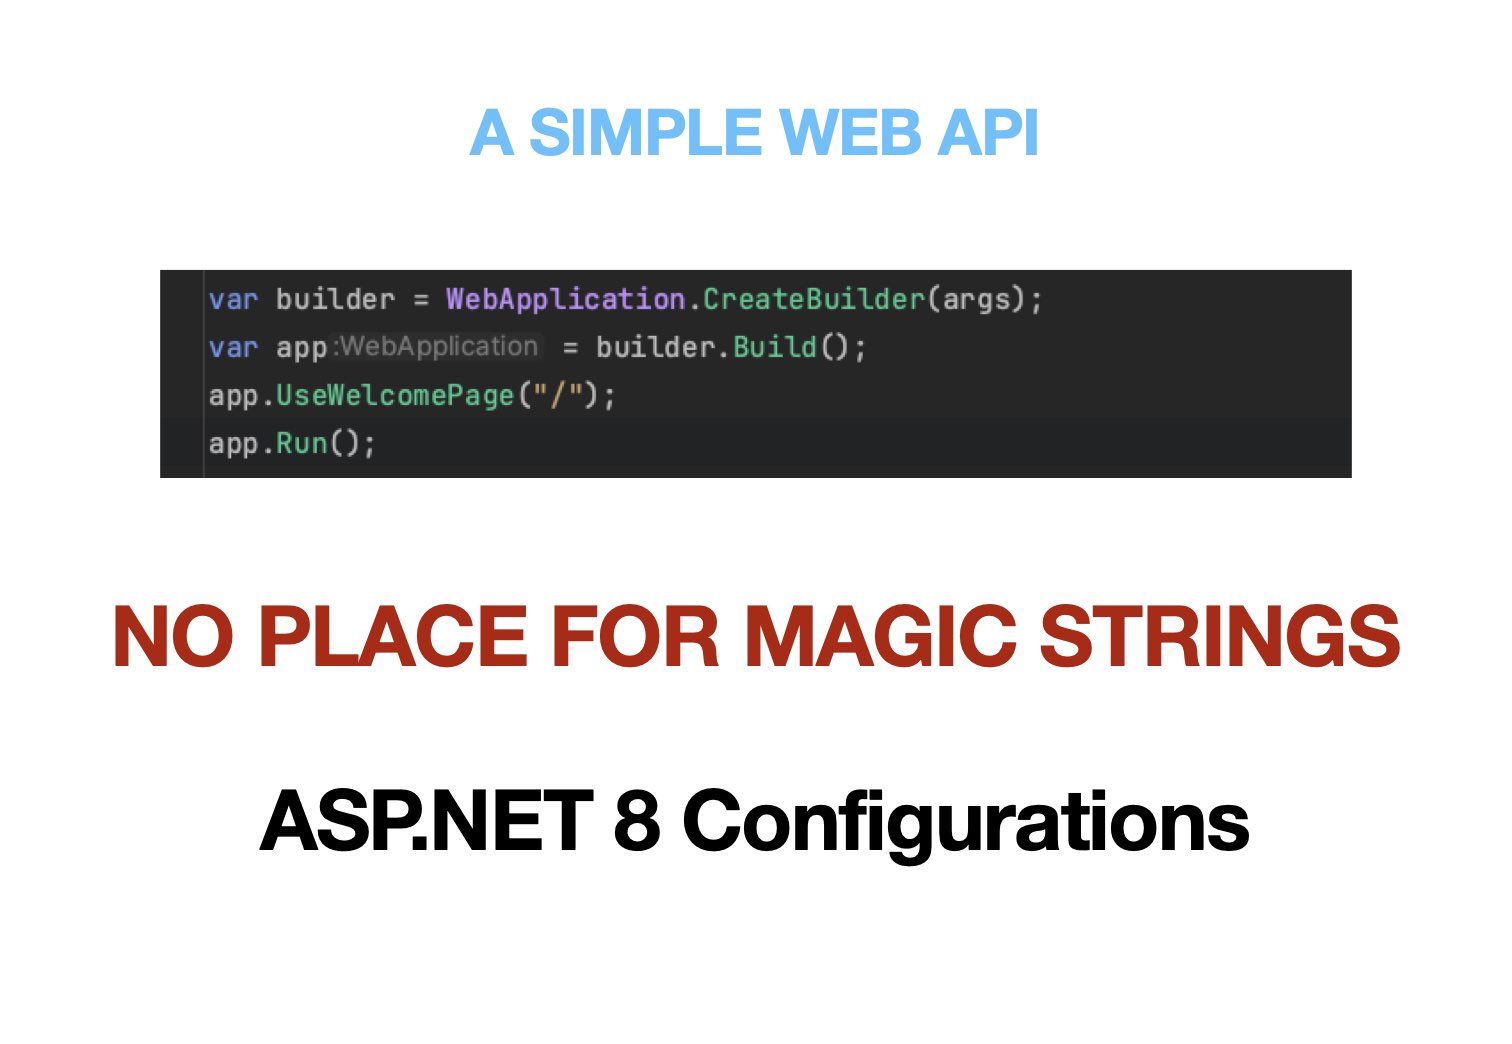 ASP.NET 8 Configurations With no magic strings